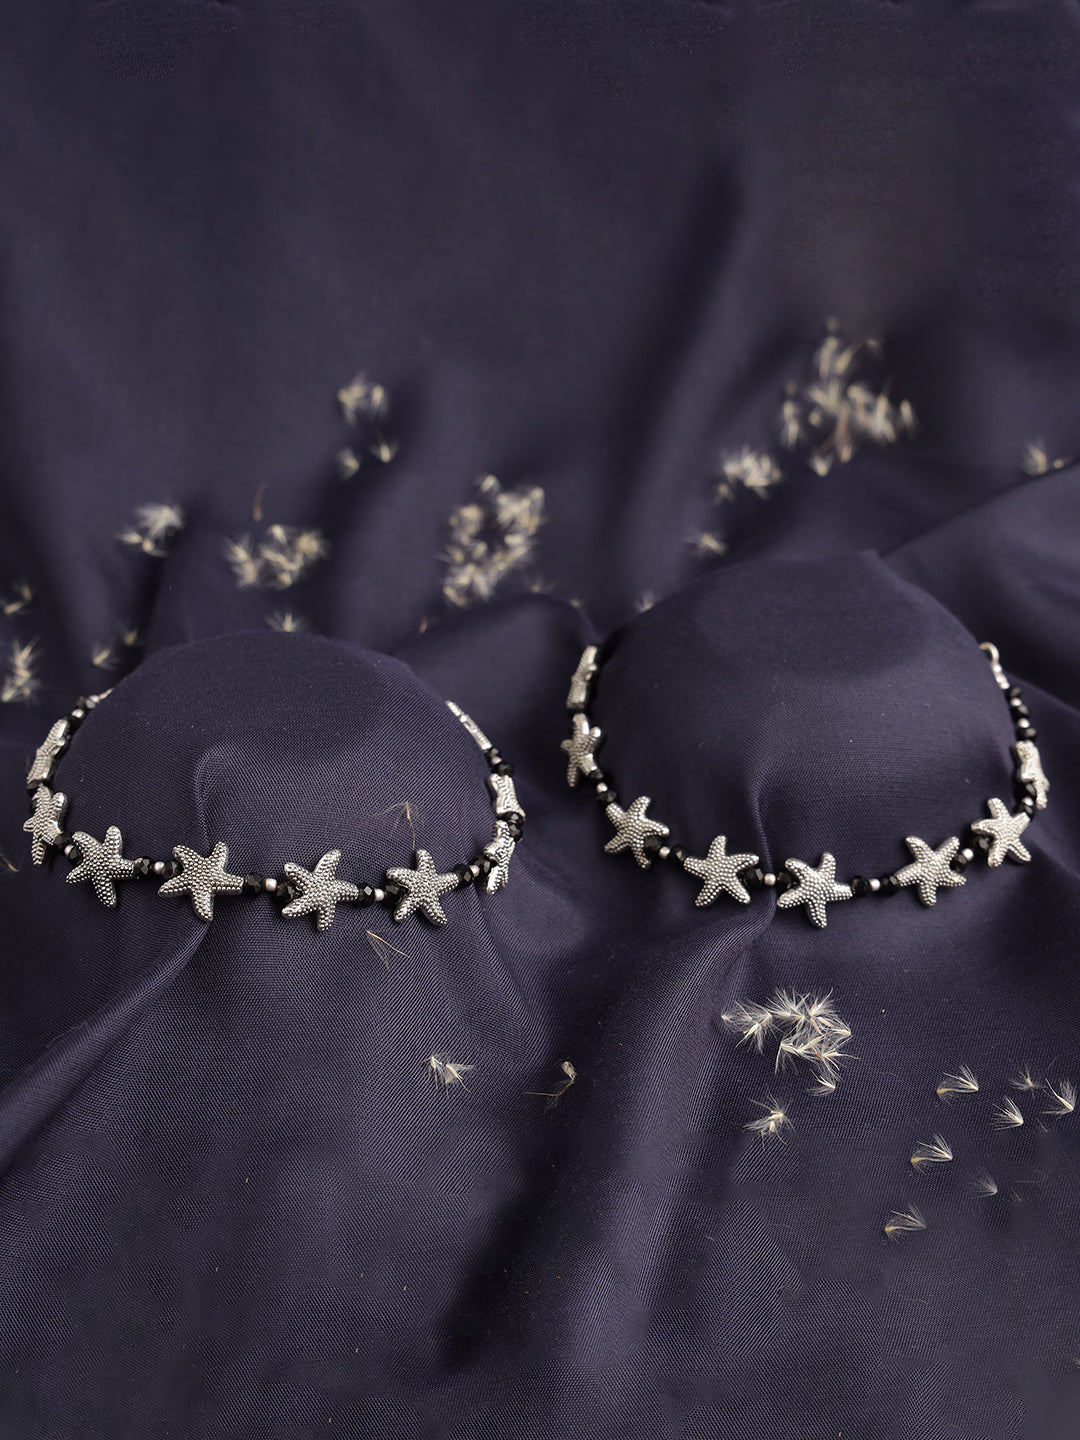 Silver-Plated & Black Beaded Handcrafted Starfish Anklet